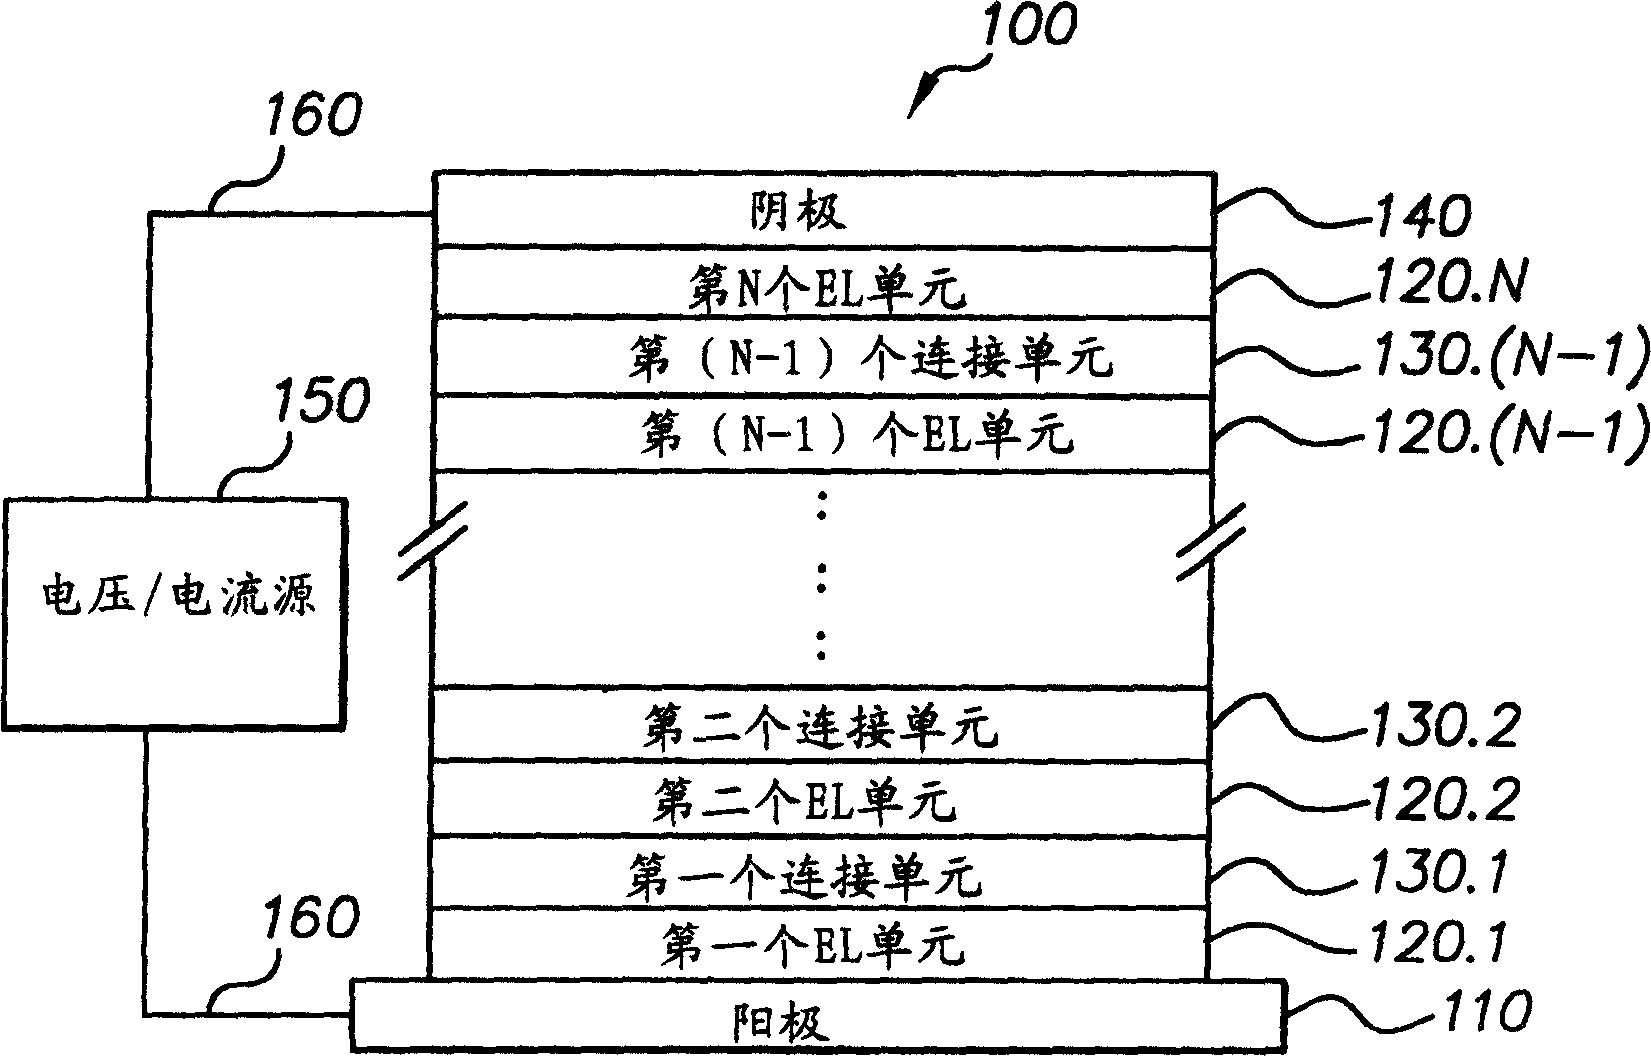 Cascaded organic electroluminescent device having connecting units with n-type and p-type organic layers